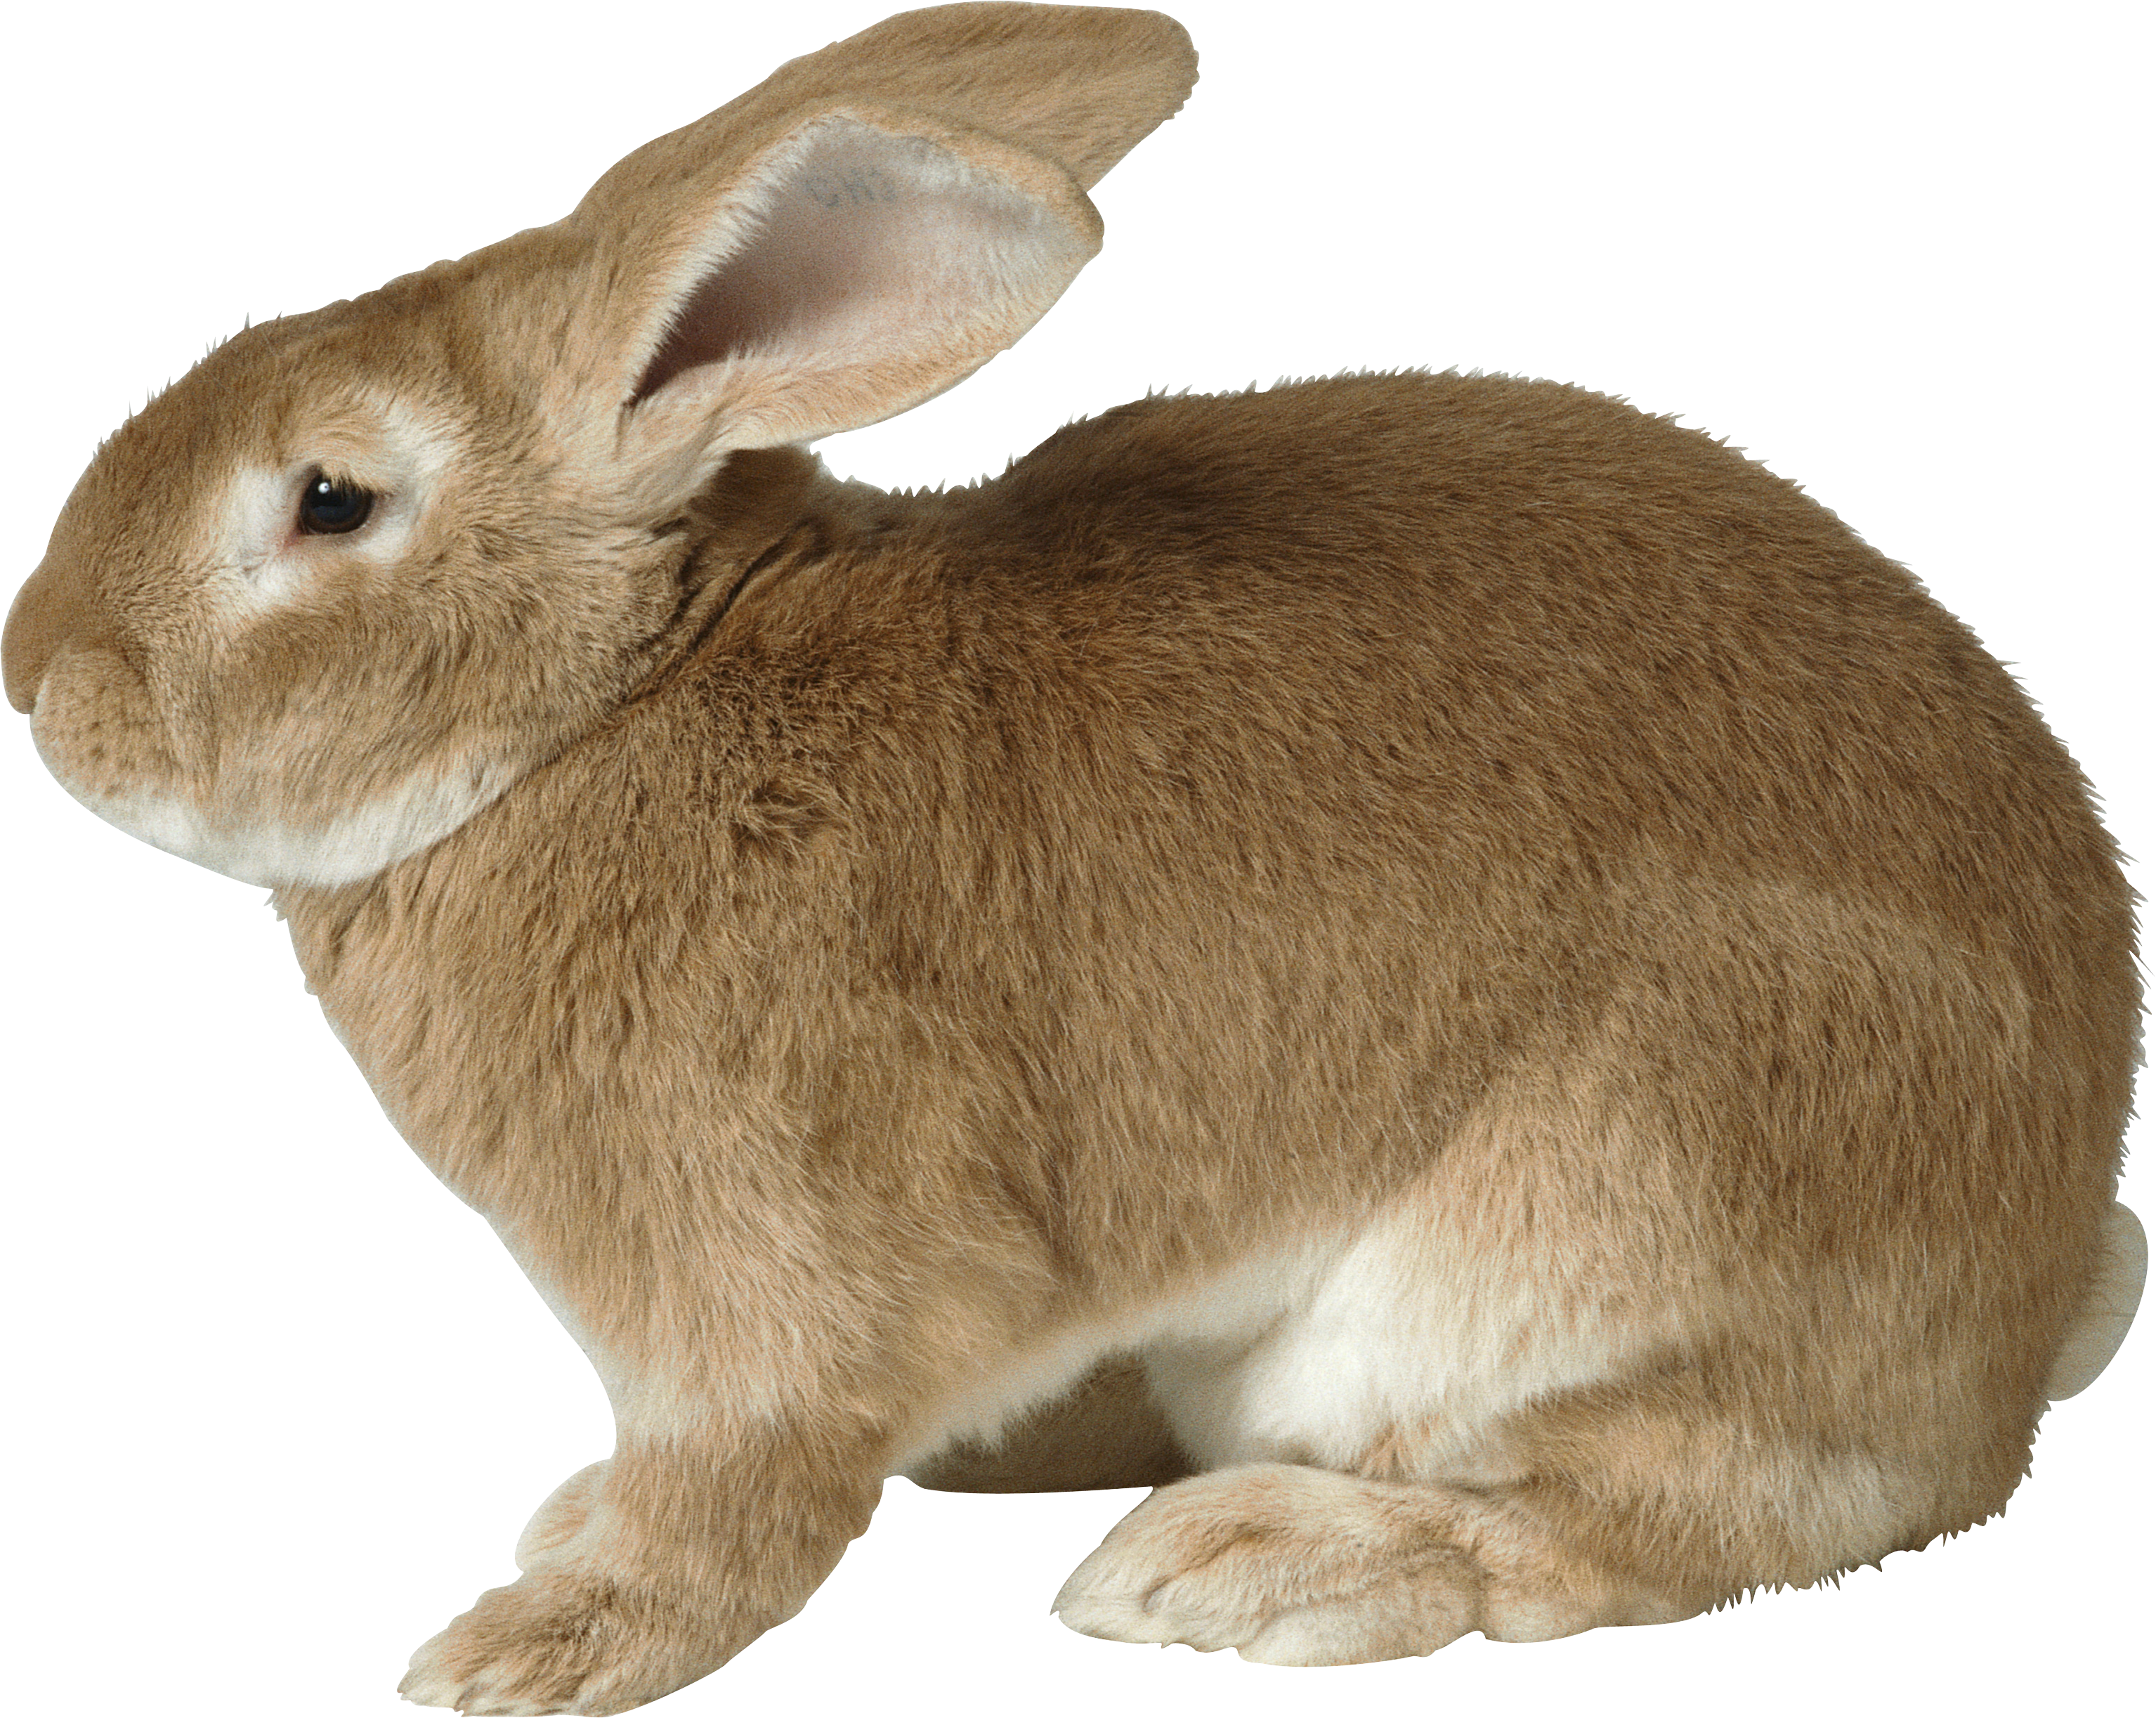 Rabbit Free vector We have ab